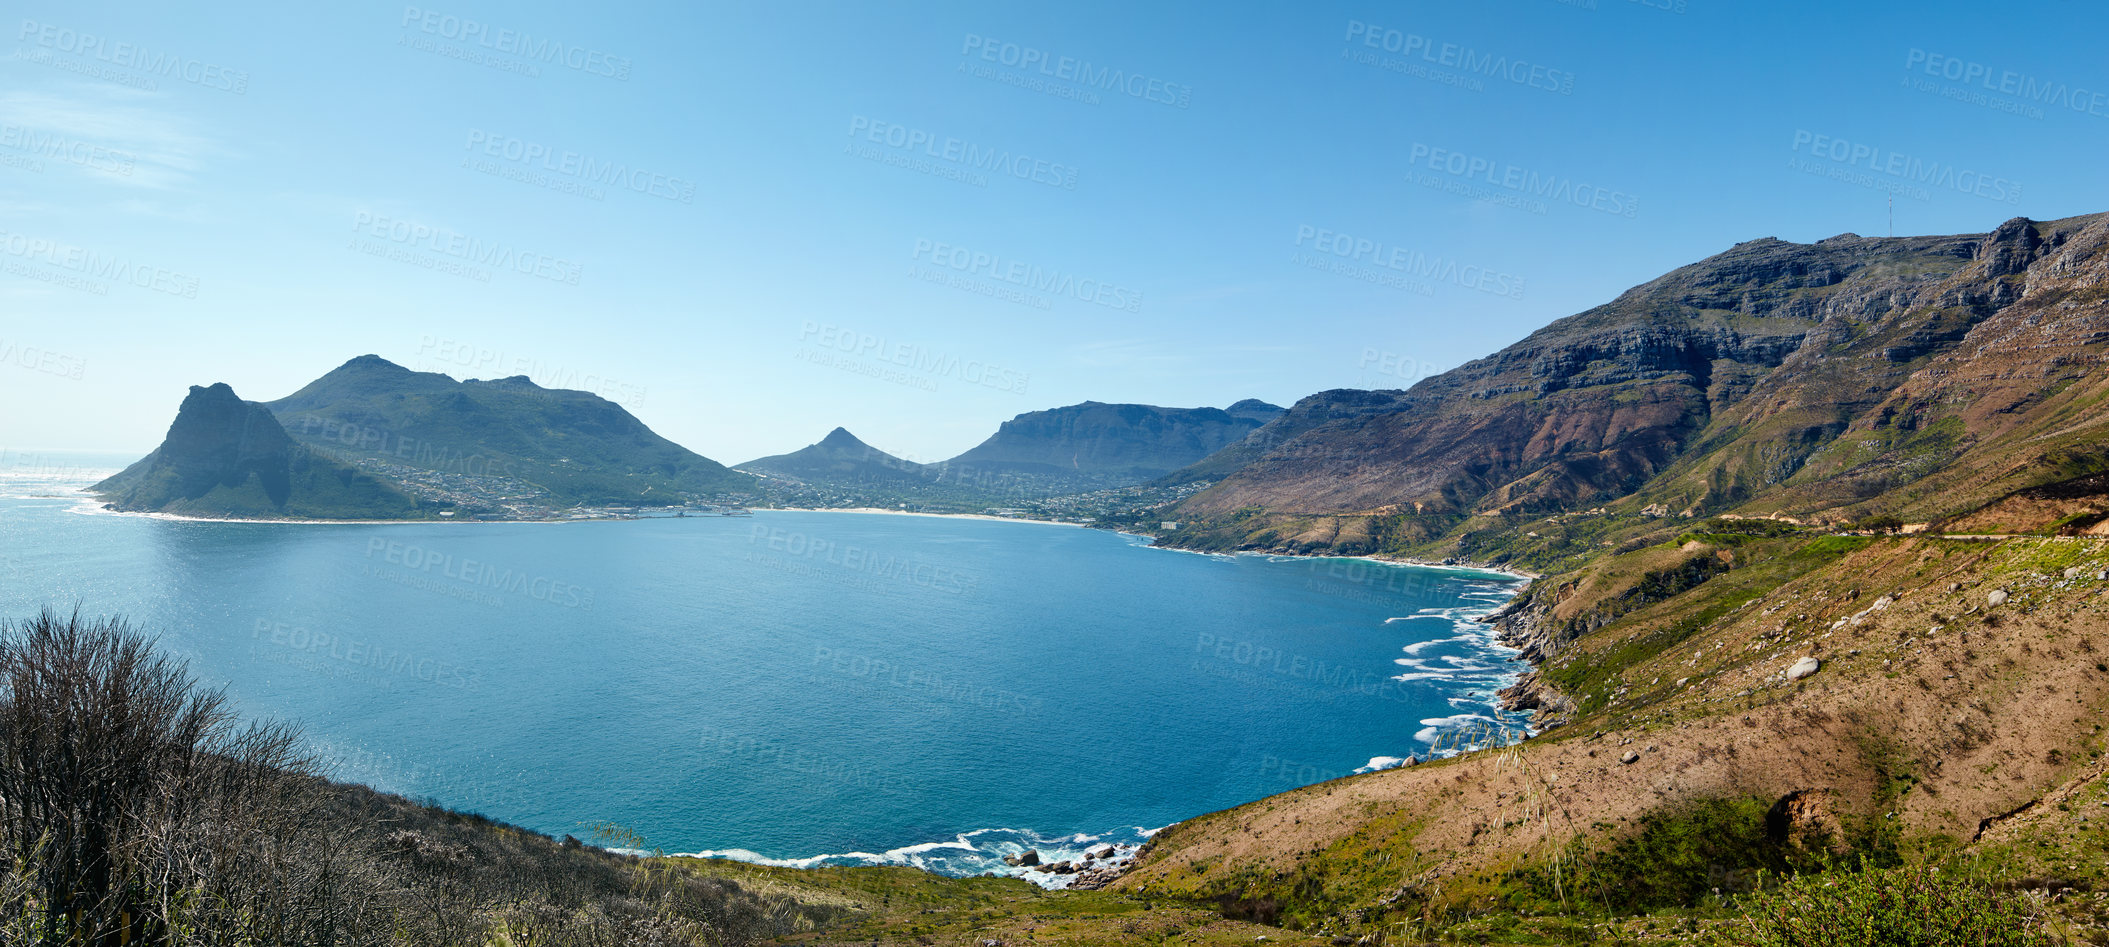 Buy stock photo Wide angle panorama of mountain coastline against clear blue sky in South Africa. Scenic landscape of Twelve Apostles mountain range near a calm ocean in Hout Bay. Popular hiking location from above